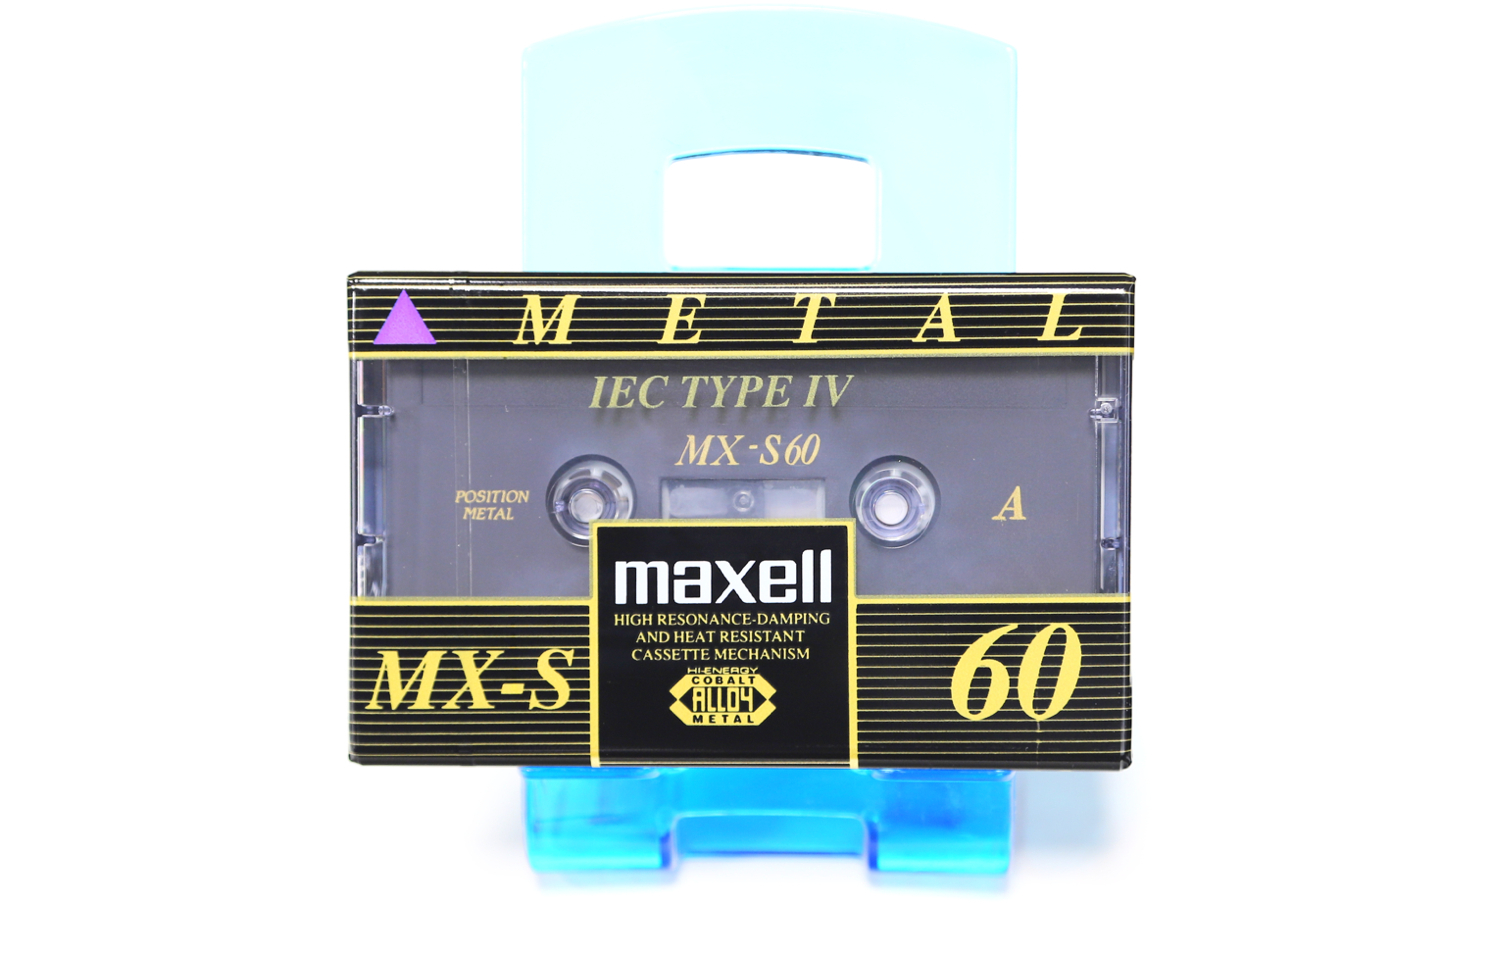 MAXELL MX-S60 Position Metal